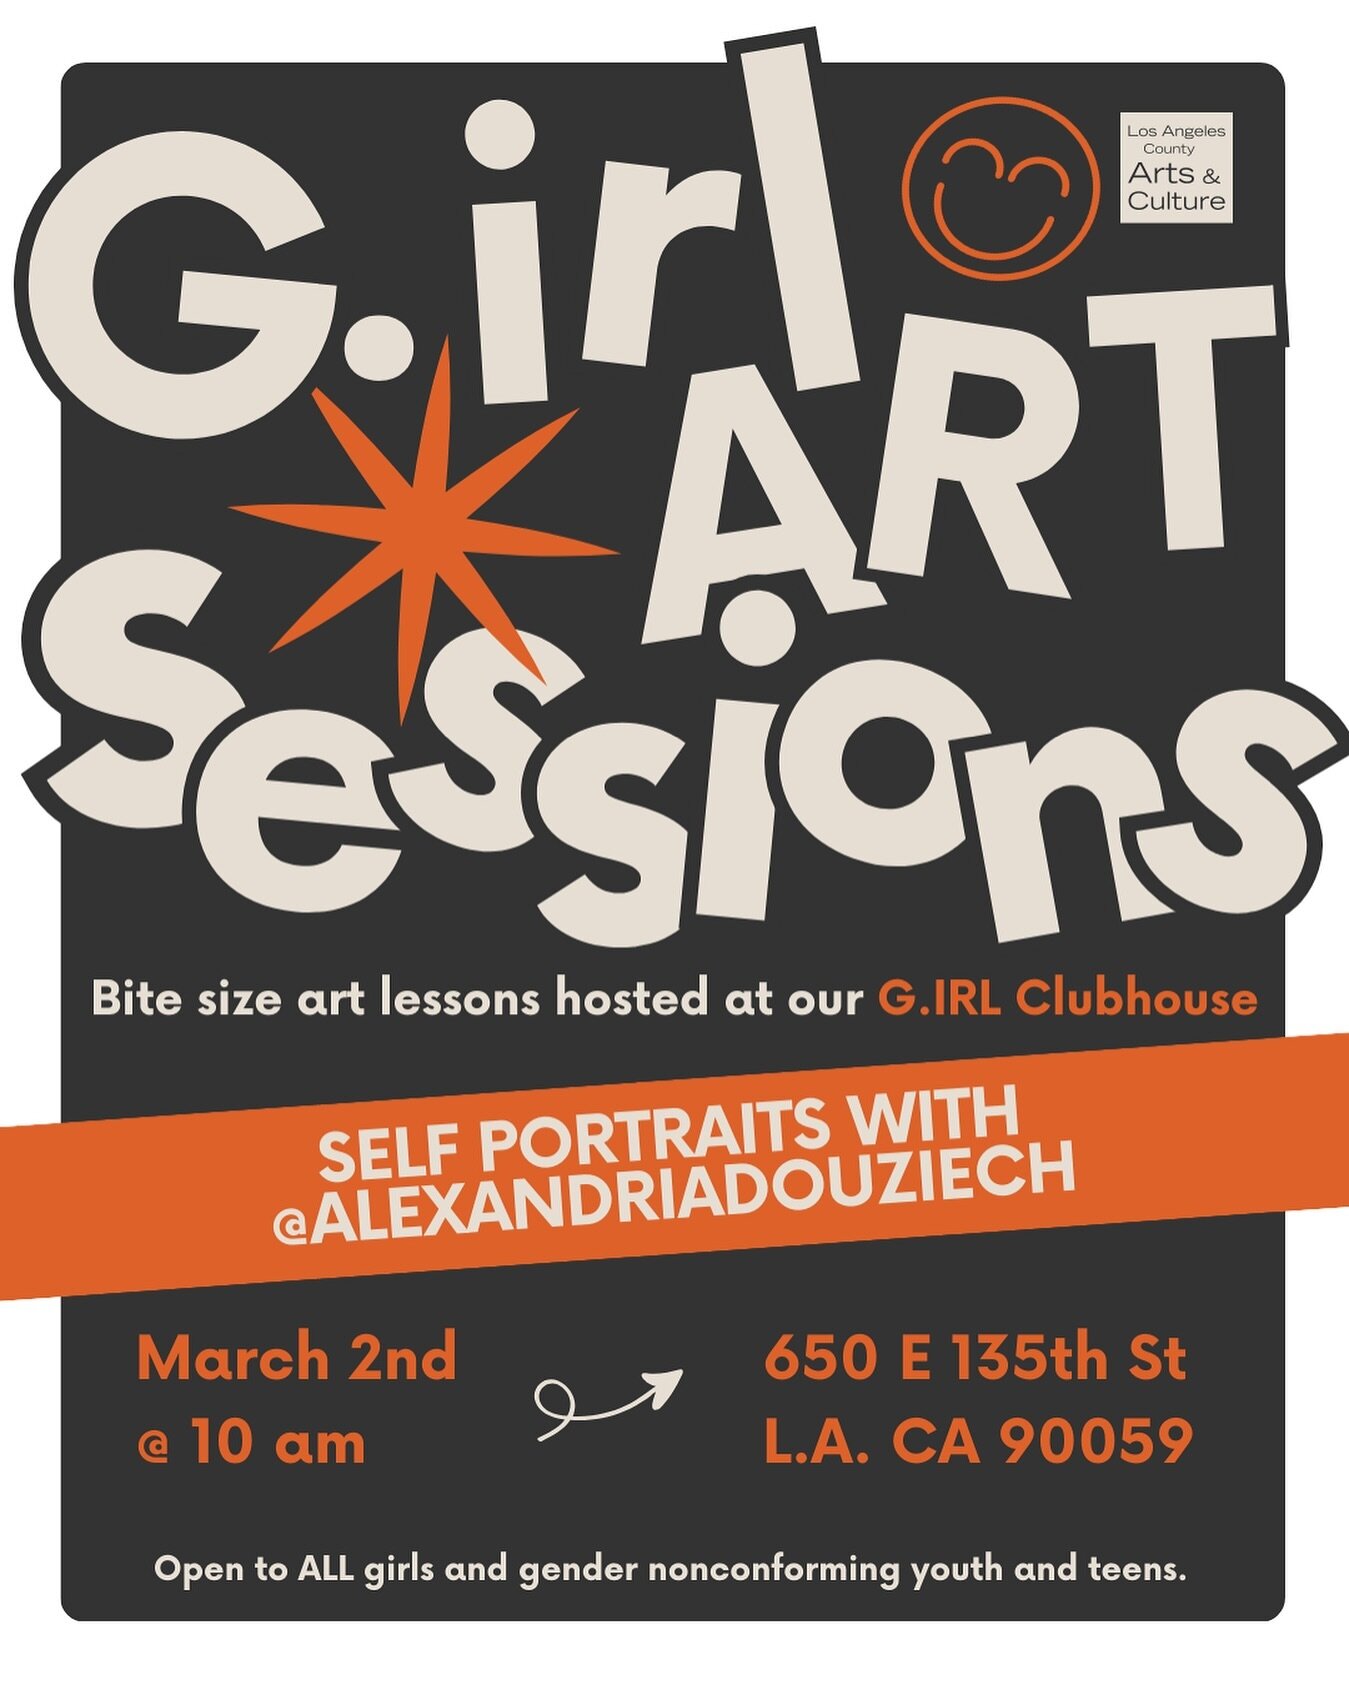 Join us for our G.IRL Art Sessions hosted at our new G.IRL Clubhouse.

These are short beginner-level art classes that explore all forms of art.

This Saturday, March 2nd, at 10 am, we will be exploring the art of the Self Portrait with @AlexandriaDo